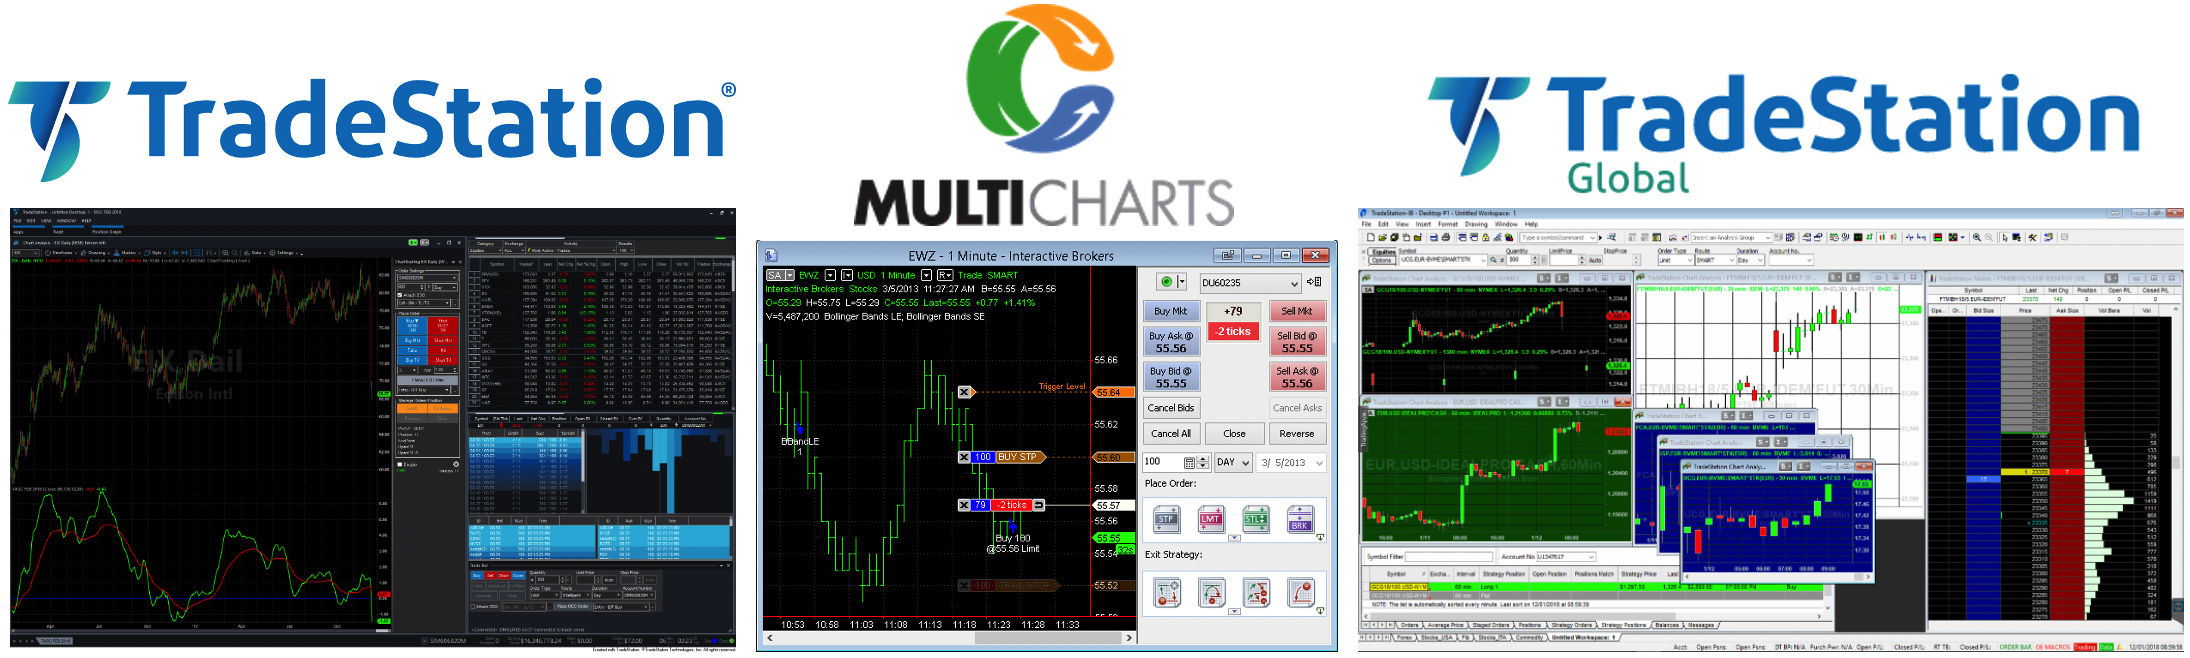 software corso easy language: testare trading system, creare da trading system e sviluppo trading system